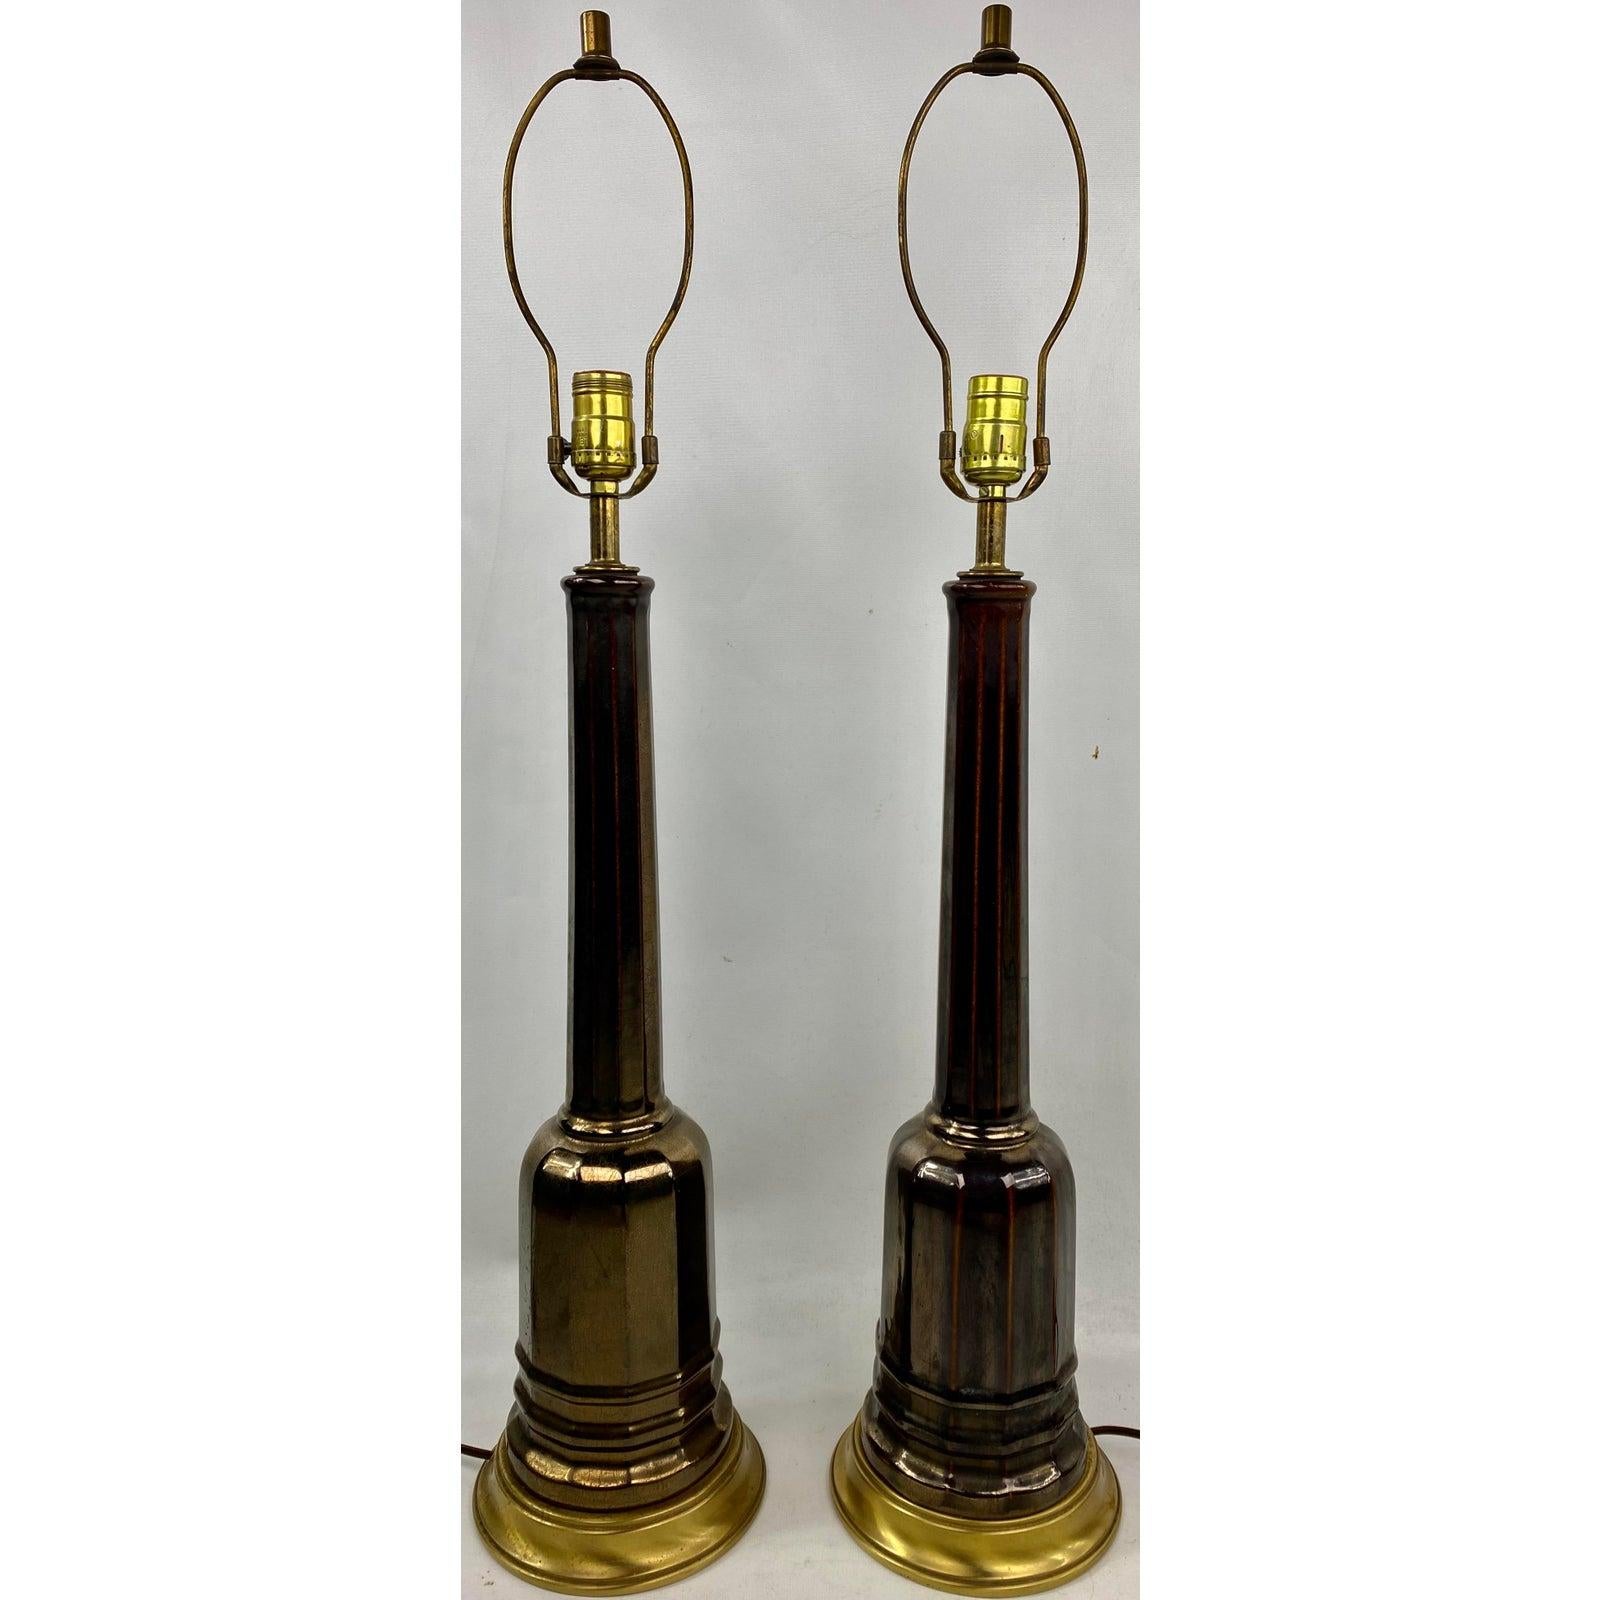 Art Deco Porcelain Column Lamps - a Pair In Good Condition For Sale In Esperance, NY